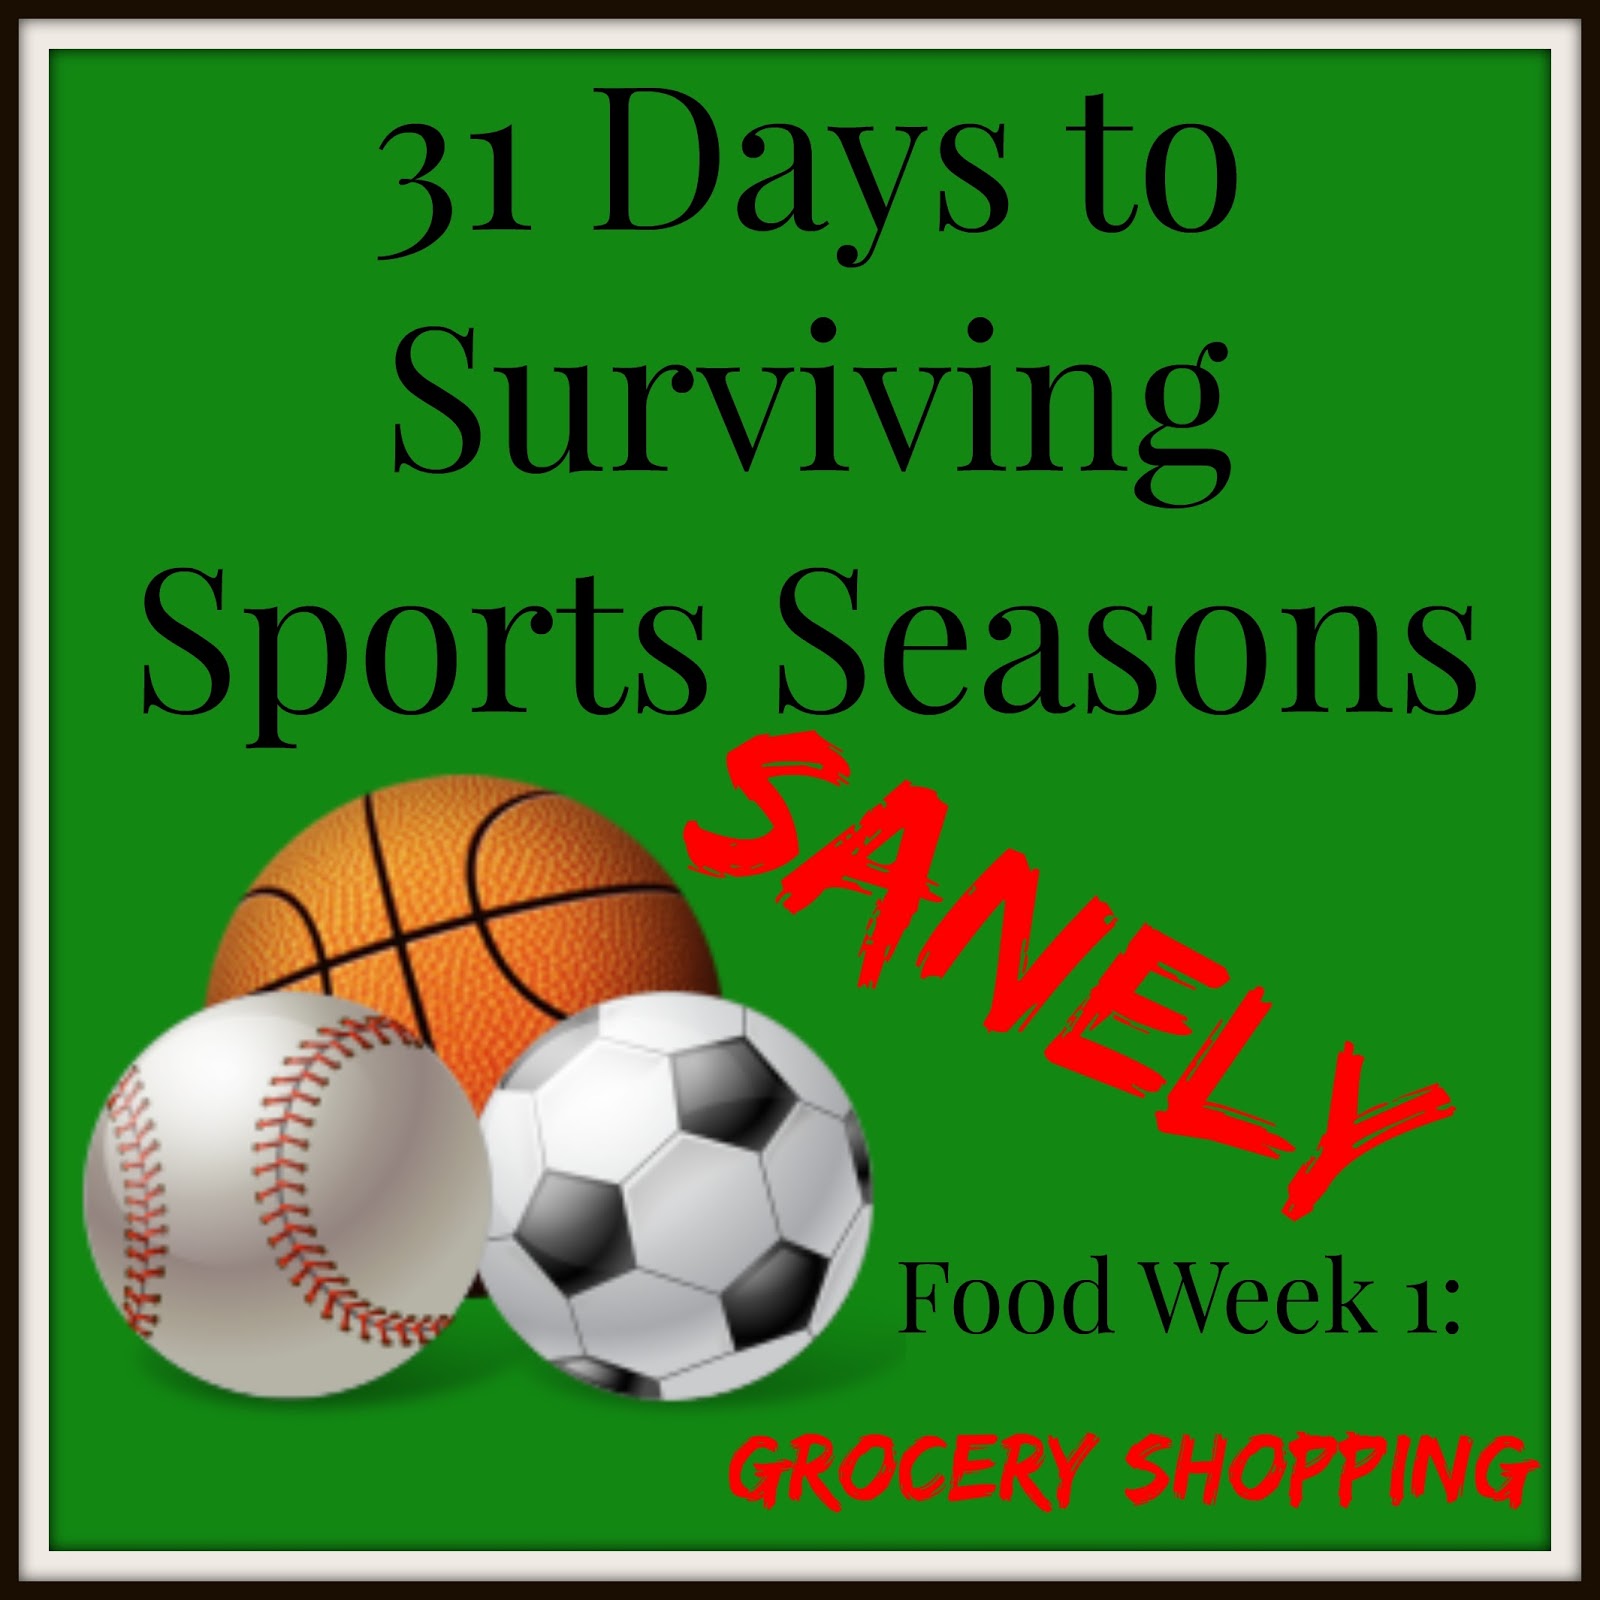 31 Days to Surviving Sports Seasons Sanely: Grocery Shopping